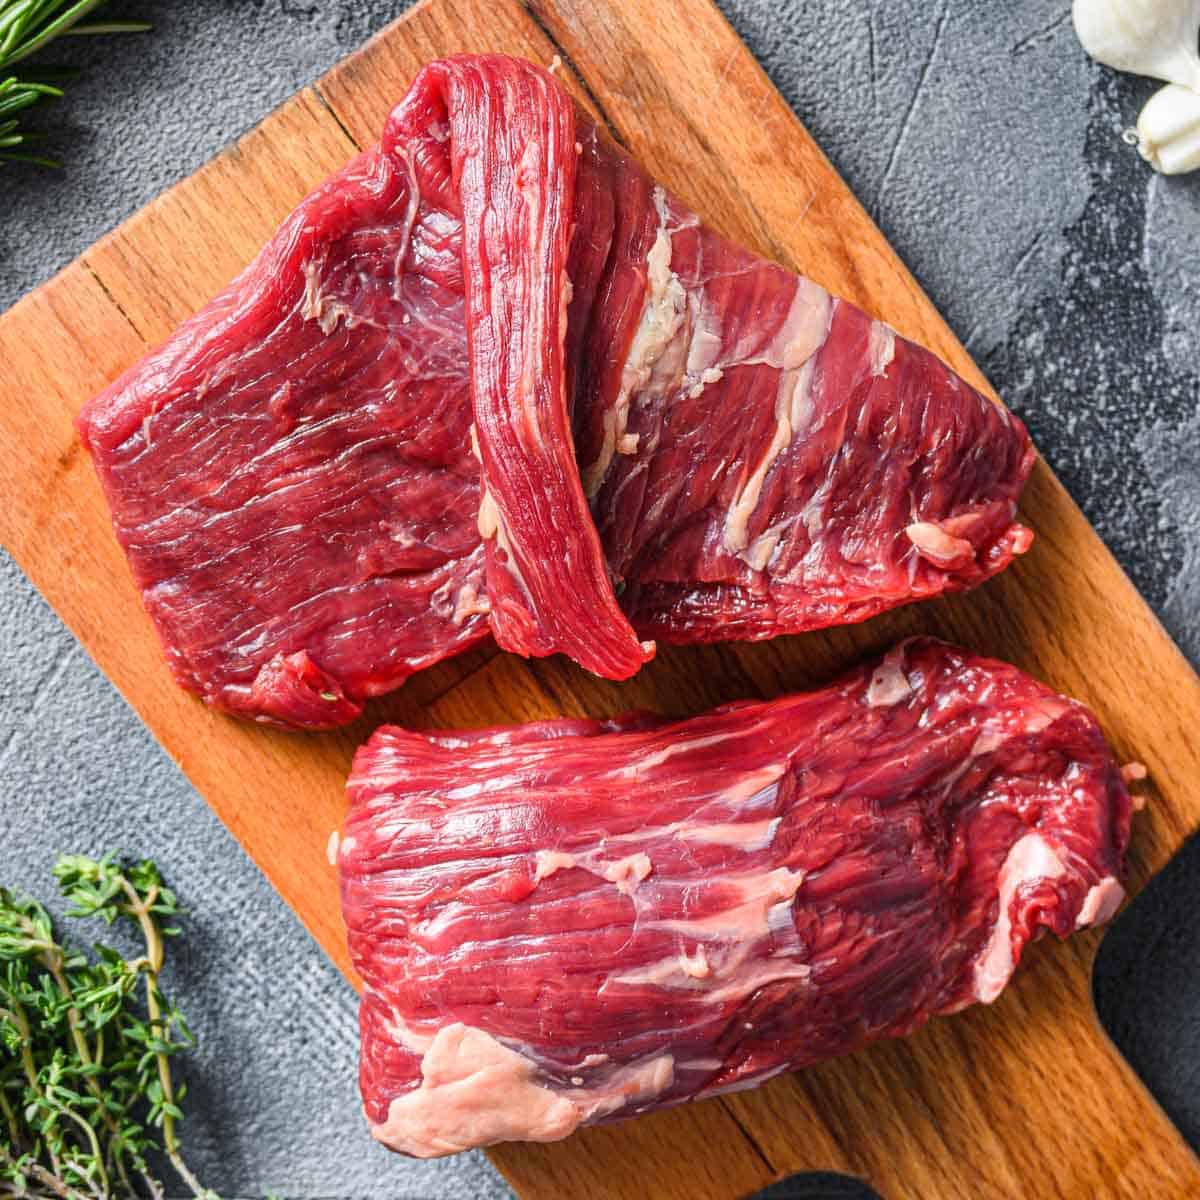 12 Different Types of Steak and How to Cook Them - TipBuzz